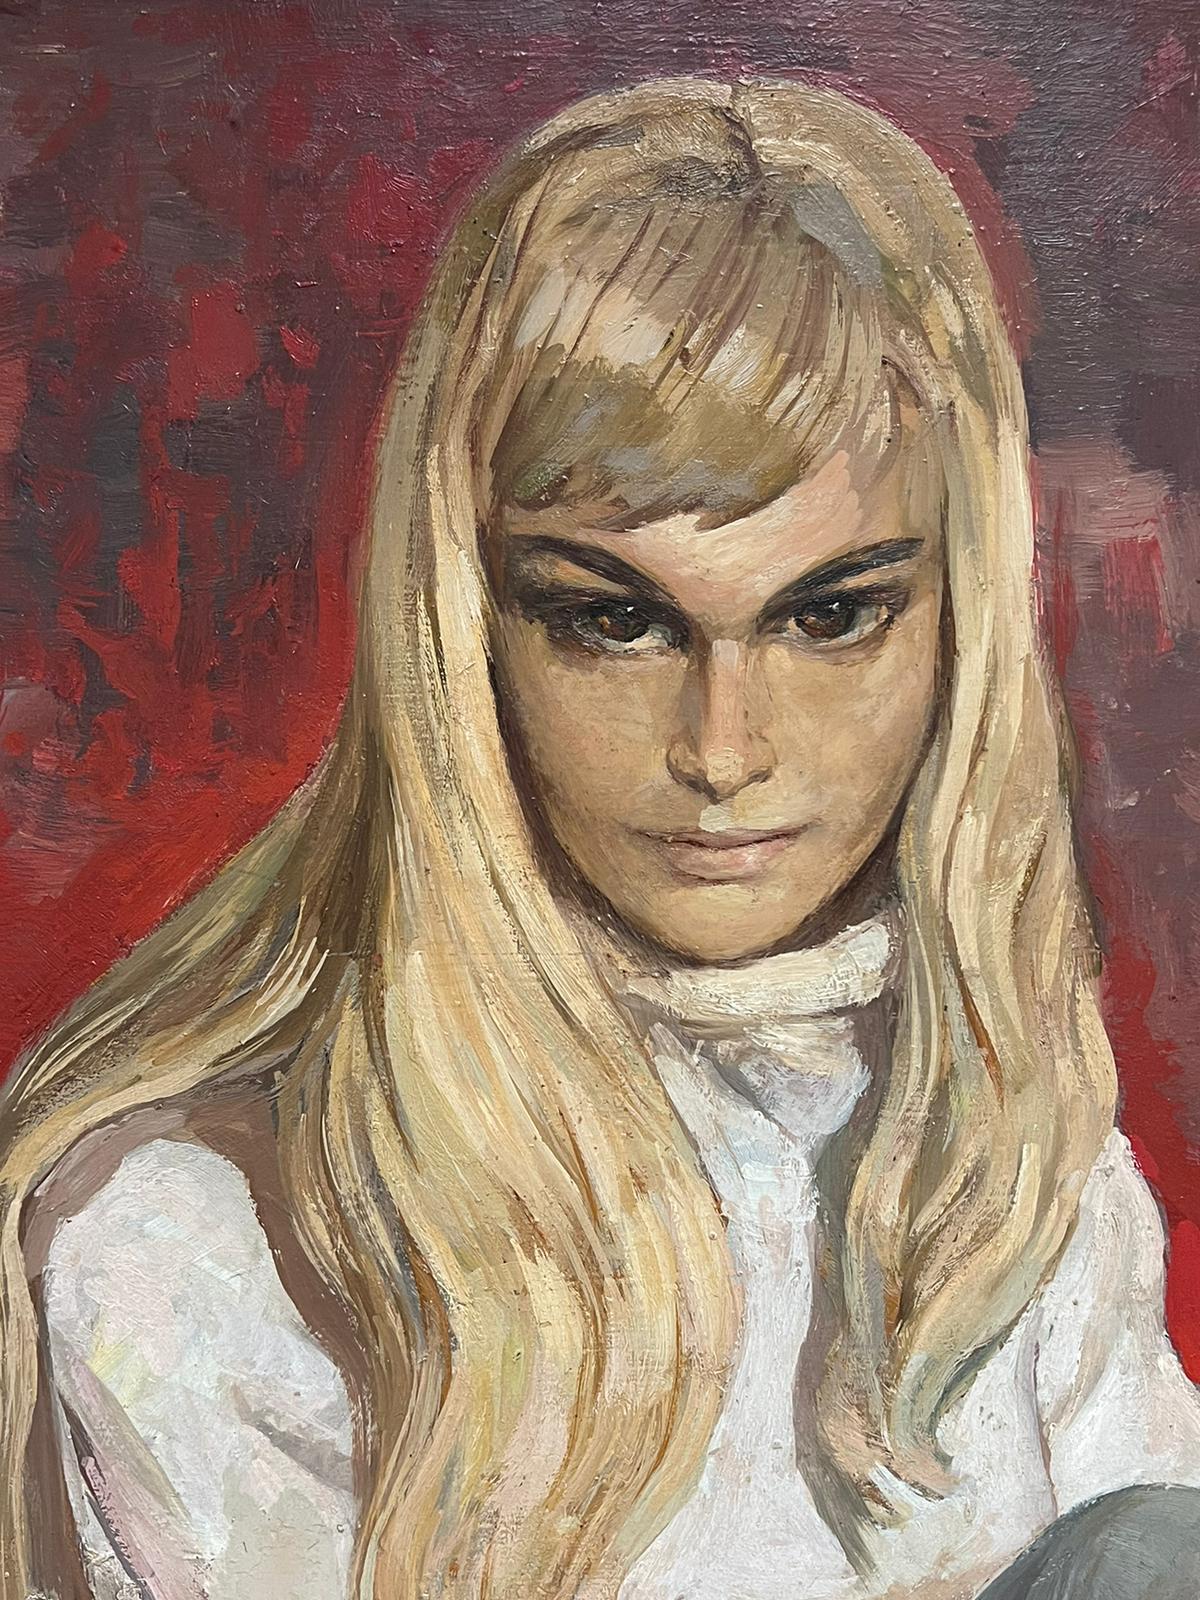 Artist/ School: Pierre PIGET (1907-1990), French. Signed lower left, dates to the 1960's period. 

Title: Portrait of a young blonde lady

Medium:    oil painting on board, framed in a cream roll neck sweater against a red background. So evocative